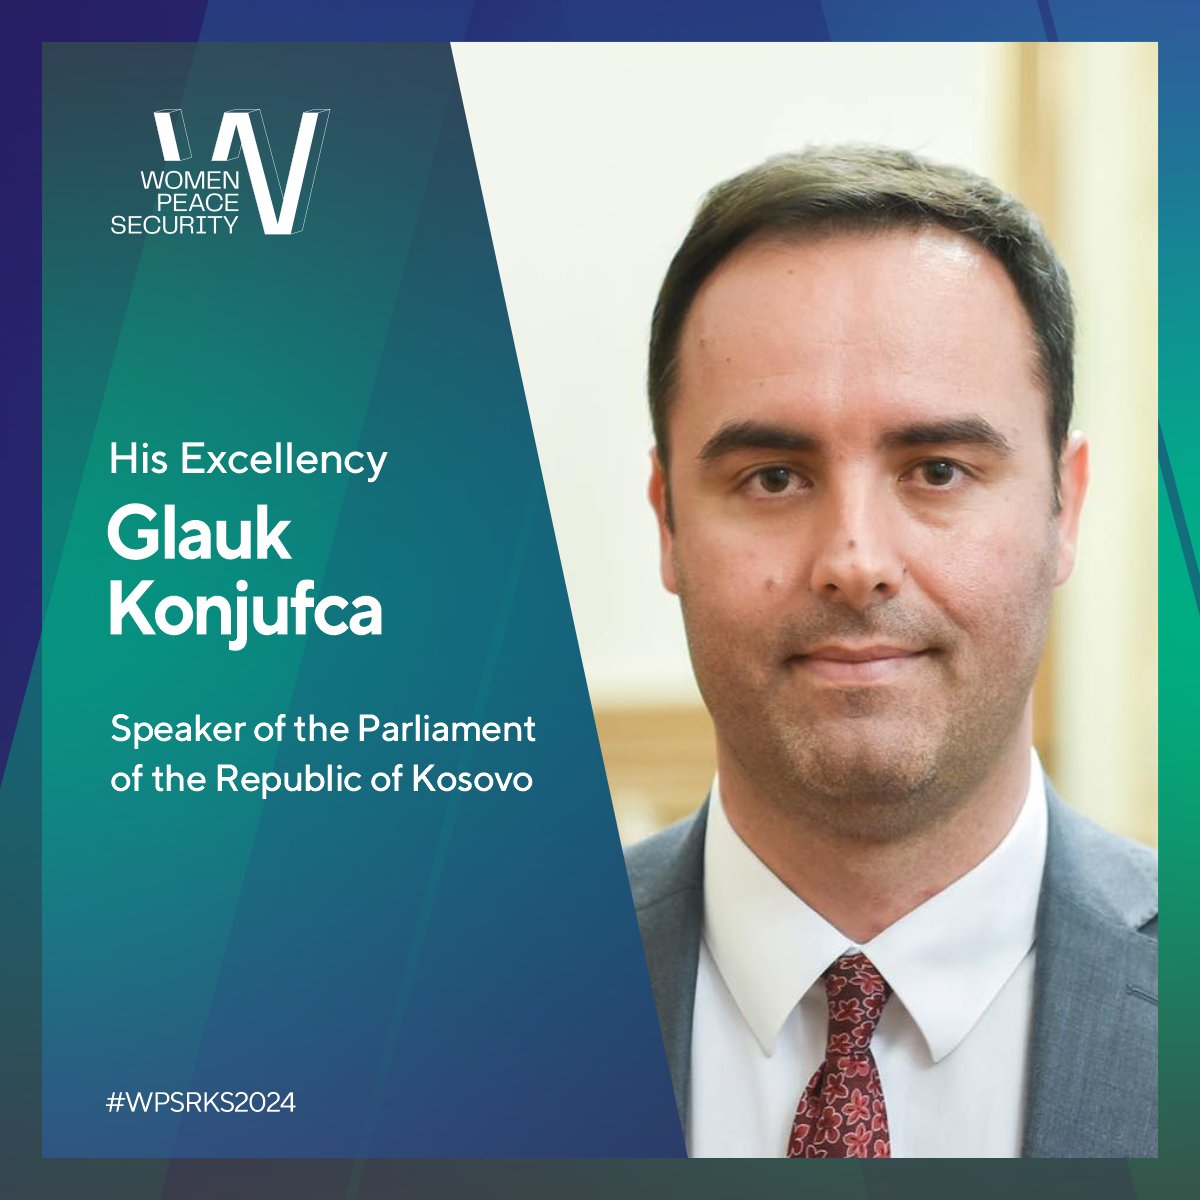 Delighted to welcome H.E. @KonjufcaGlauk, Speaker of the Parliament of the Republic of Kosovo, to the WPS Forum 2024! #WPSRKS2024 15-16 April 2024 🇽🇰 Prishtina, Kosovo 👉 wpsforum-rks.org